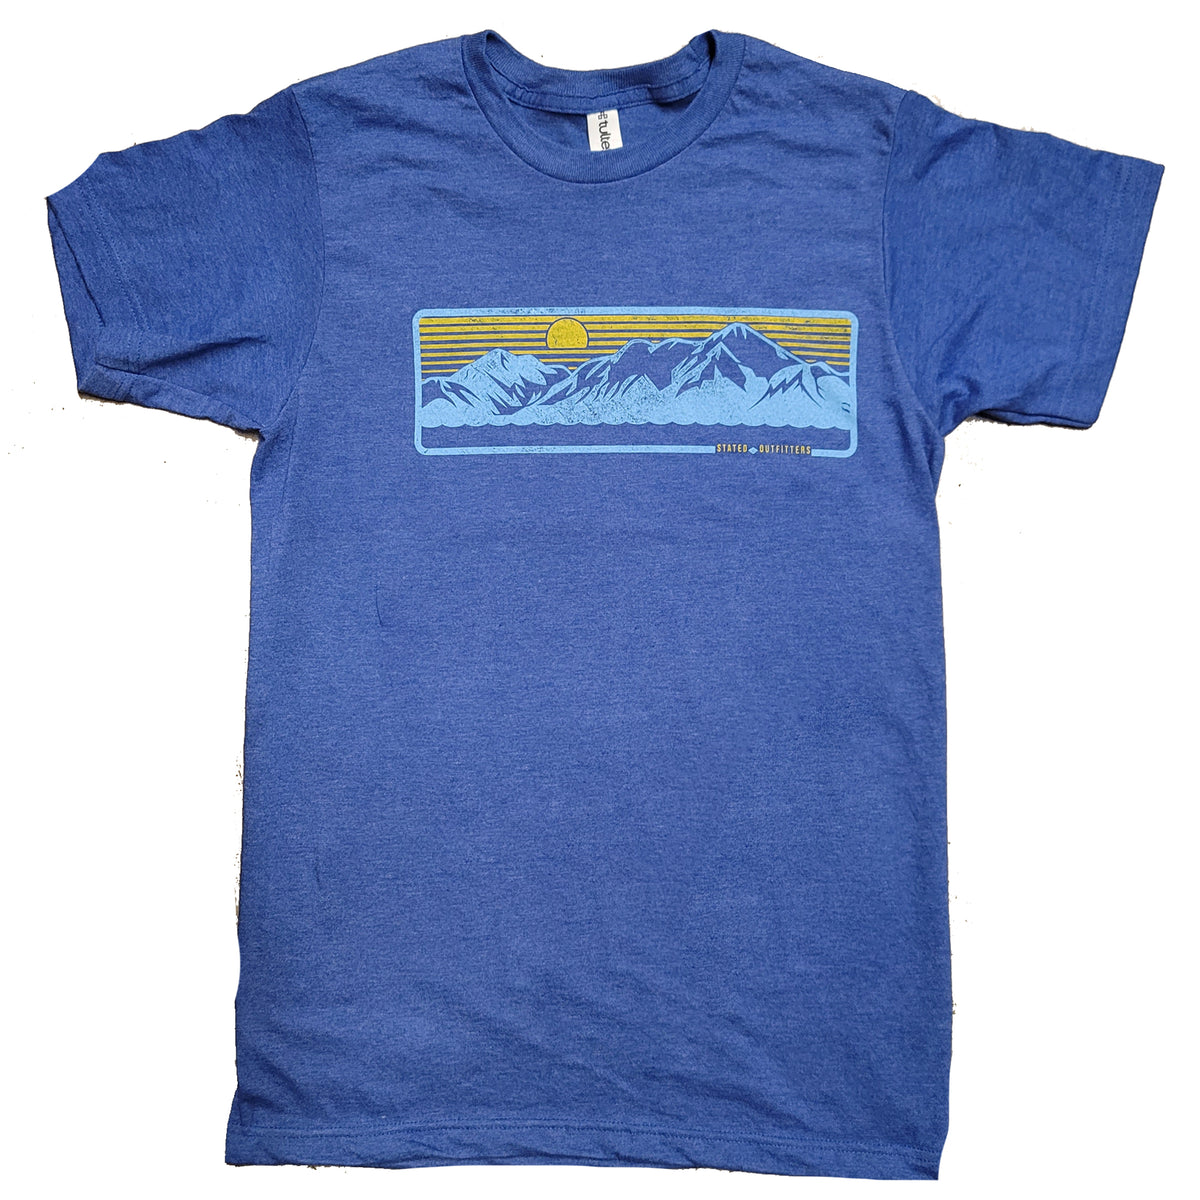 Stated Outfitters Ridgeline Tee